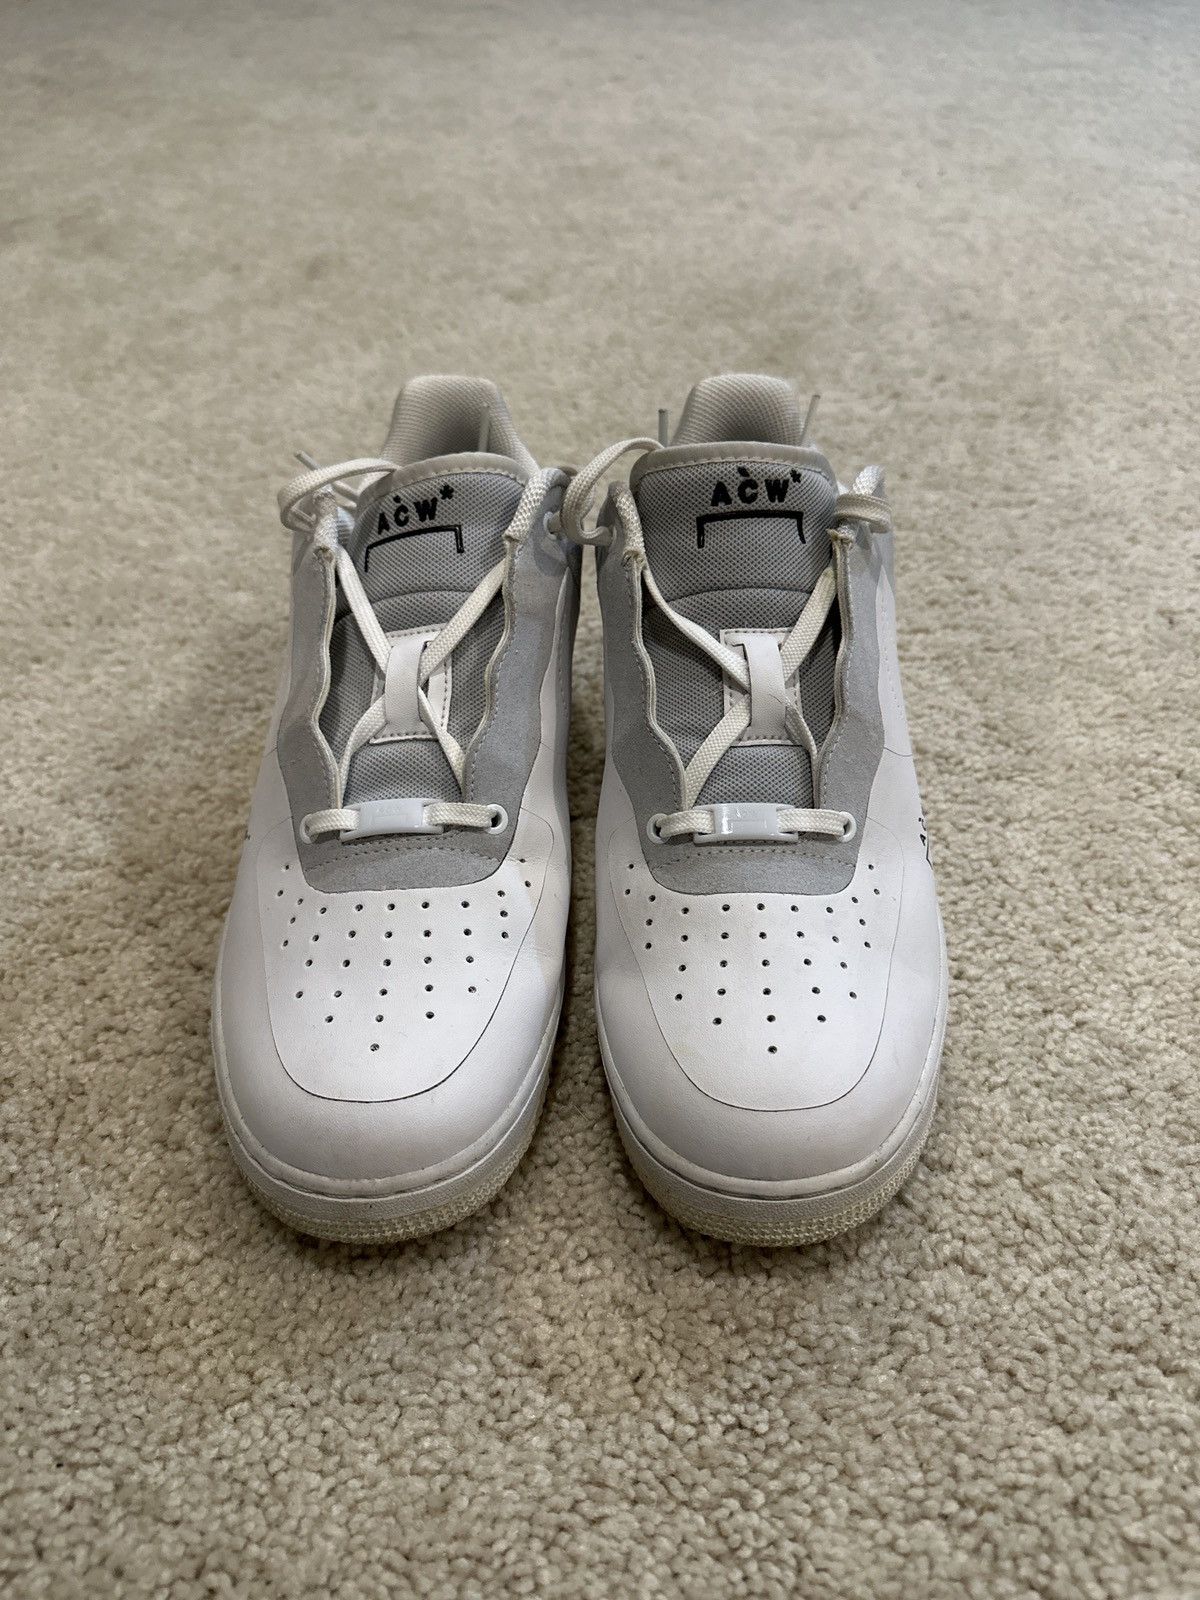 Nike A Cold Wall Air Force 1s | Grailed